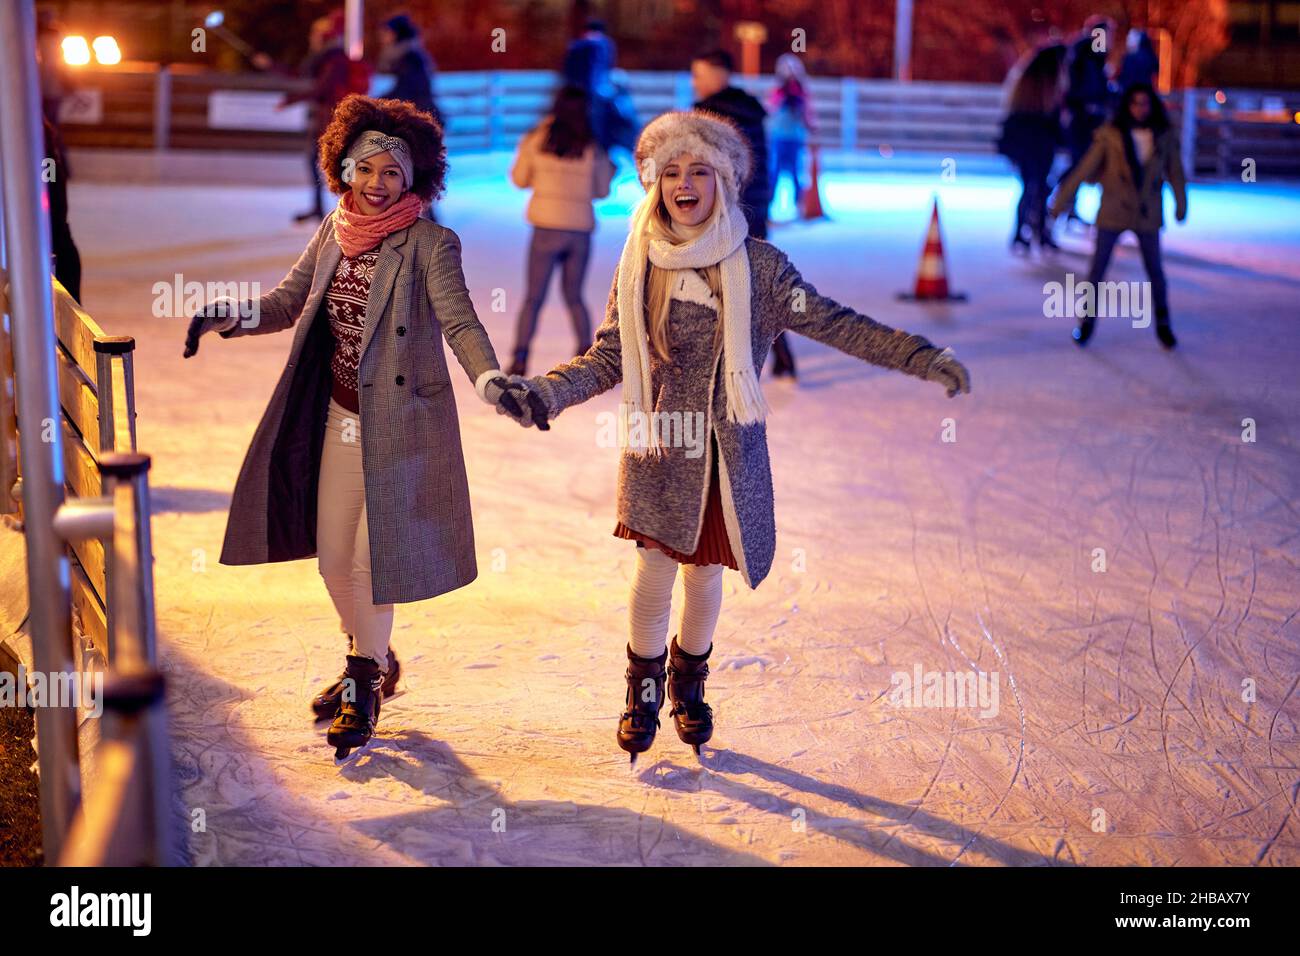 Beautiful gilfriends ice skating together at night; Winter joy concept Stock Photo